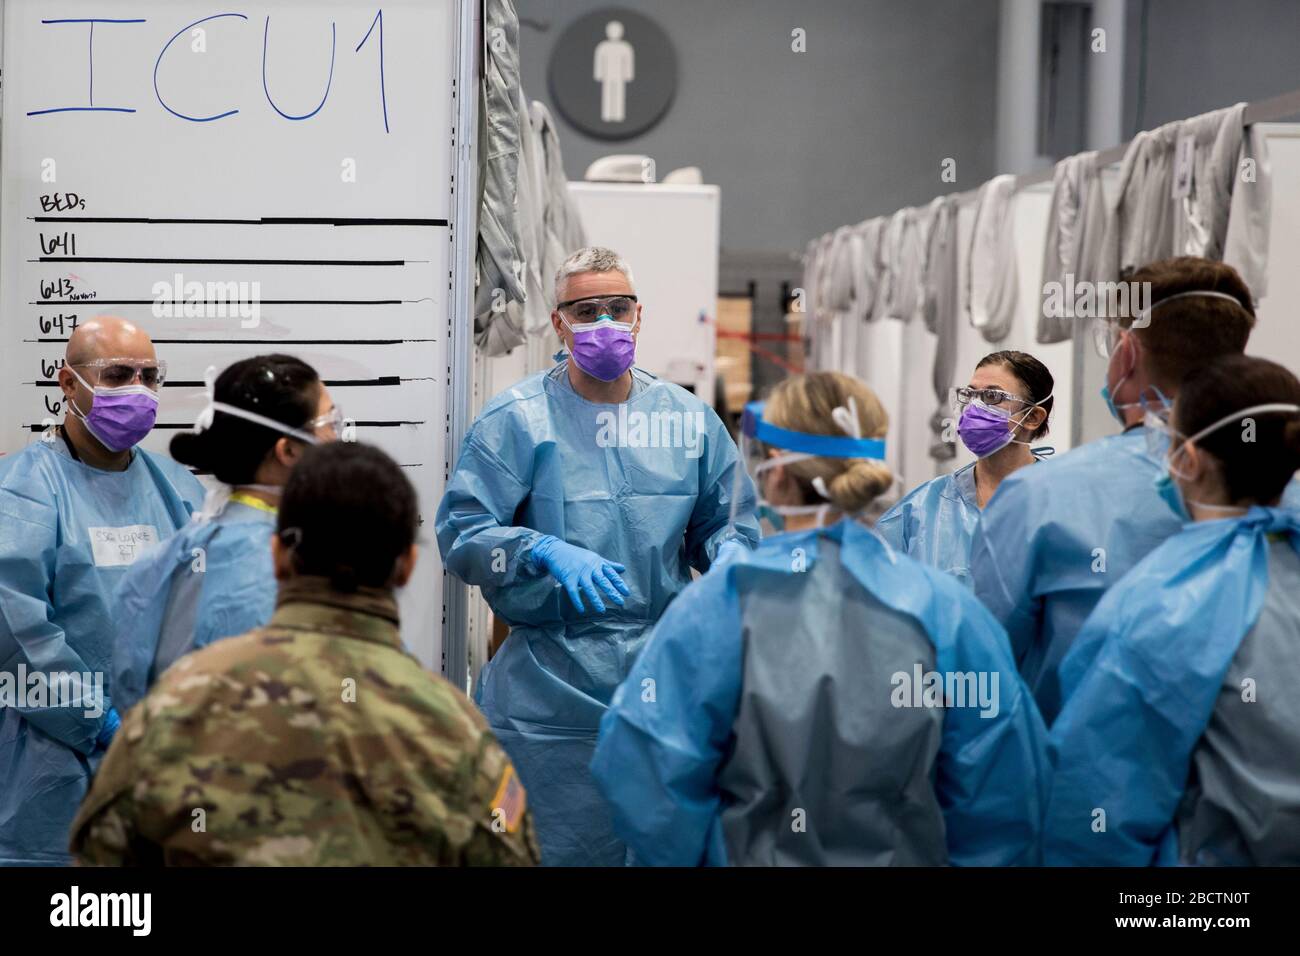 U.S. Army Maj. Sean Shirley, holds a meeting with staff in the intensive care unit bay at the Federal Medical Station COVID-19, coronavirus pandemic relief facility set up at the Jacob Javits Center April 4, 2020 in New York City, New York. Stock Photo